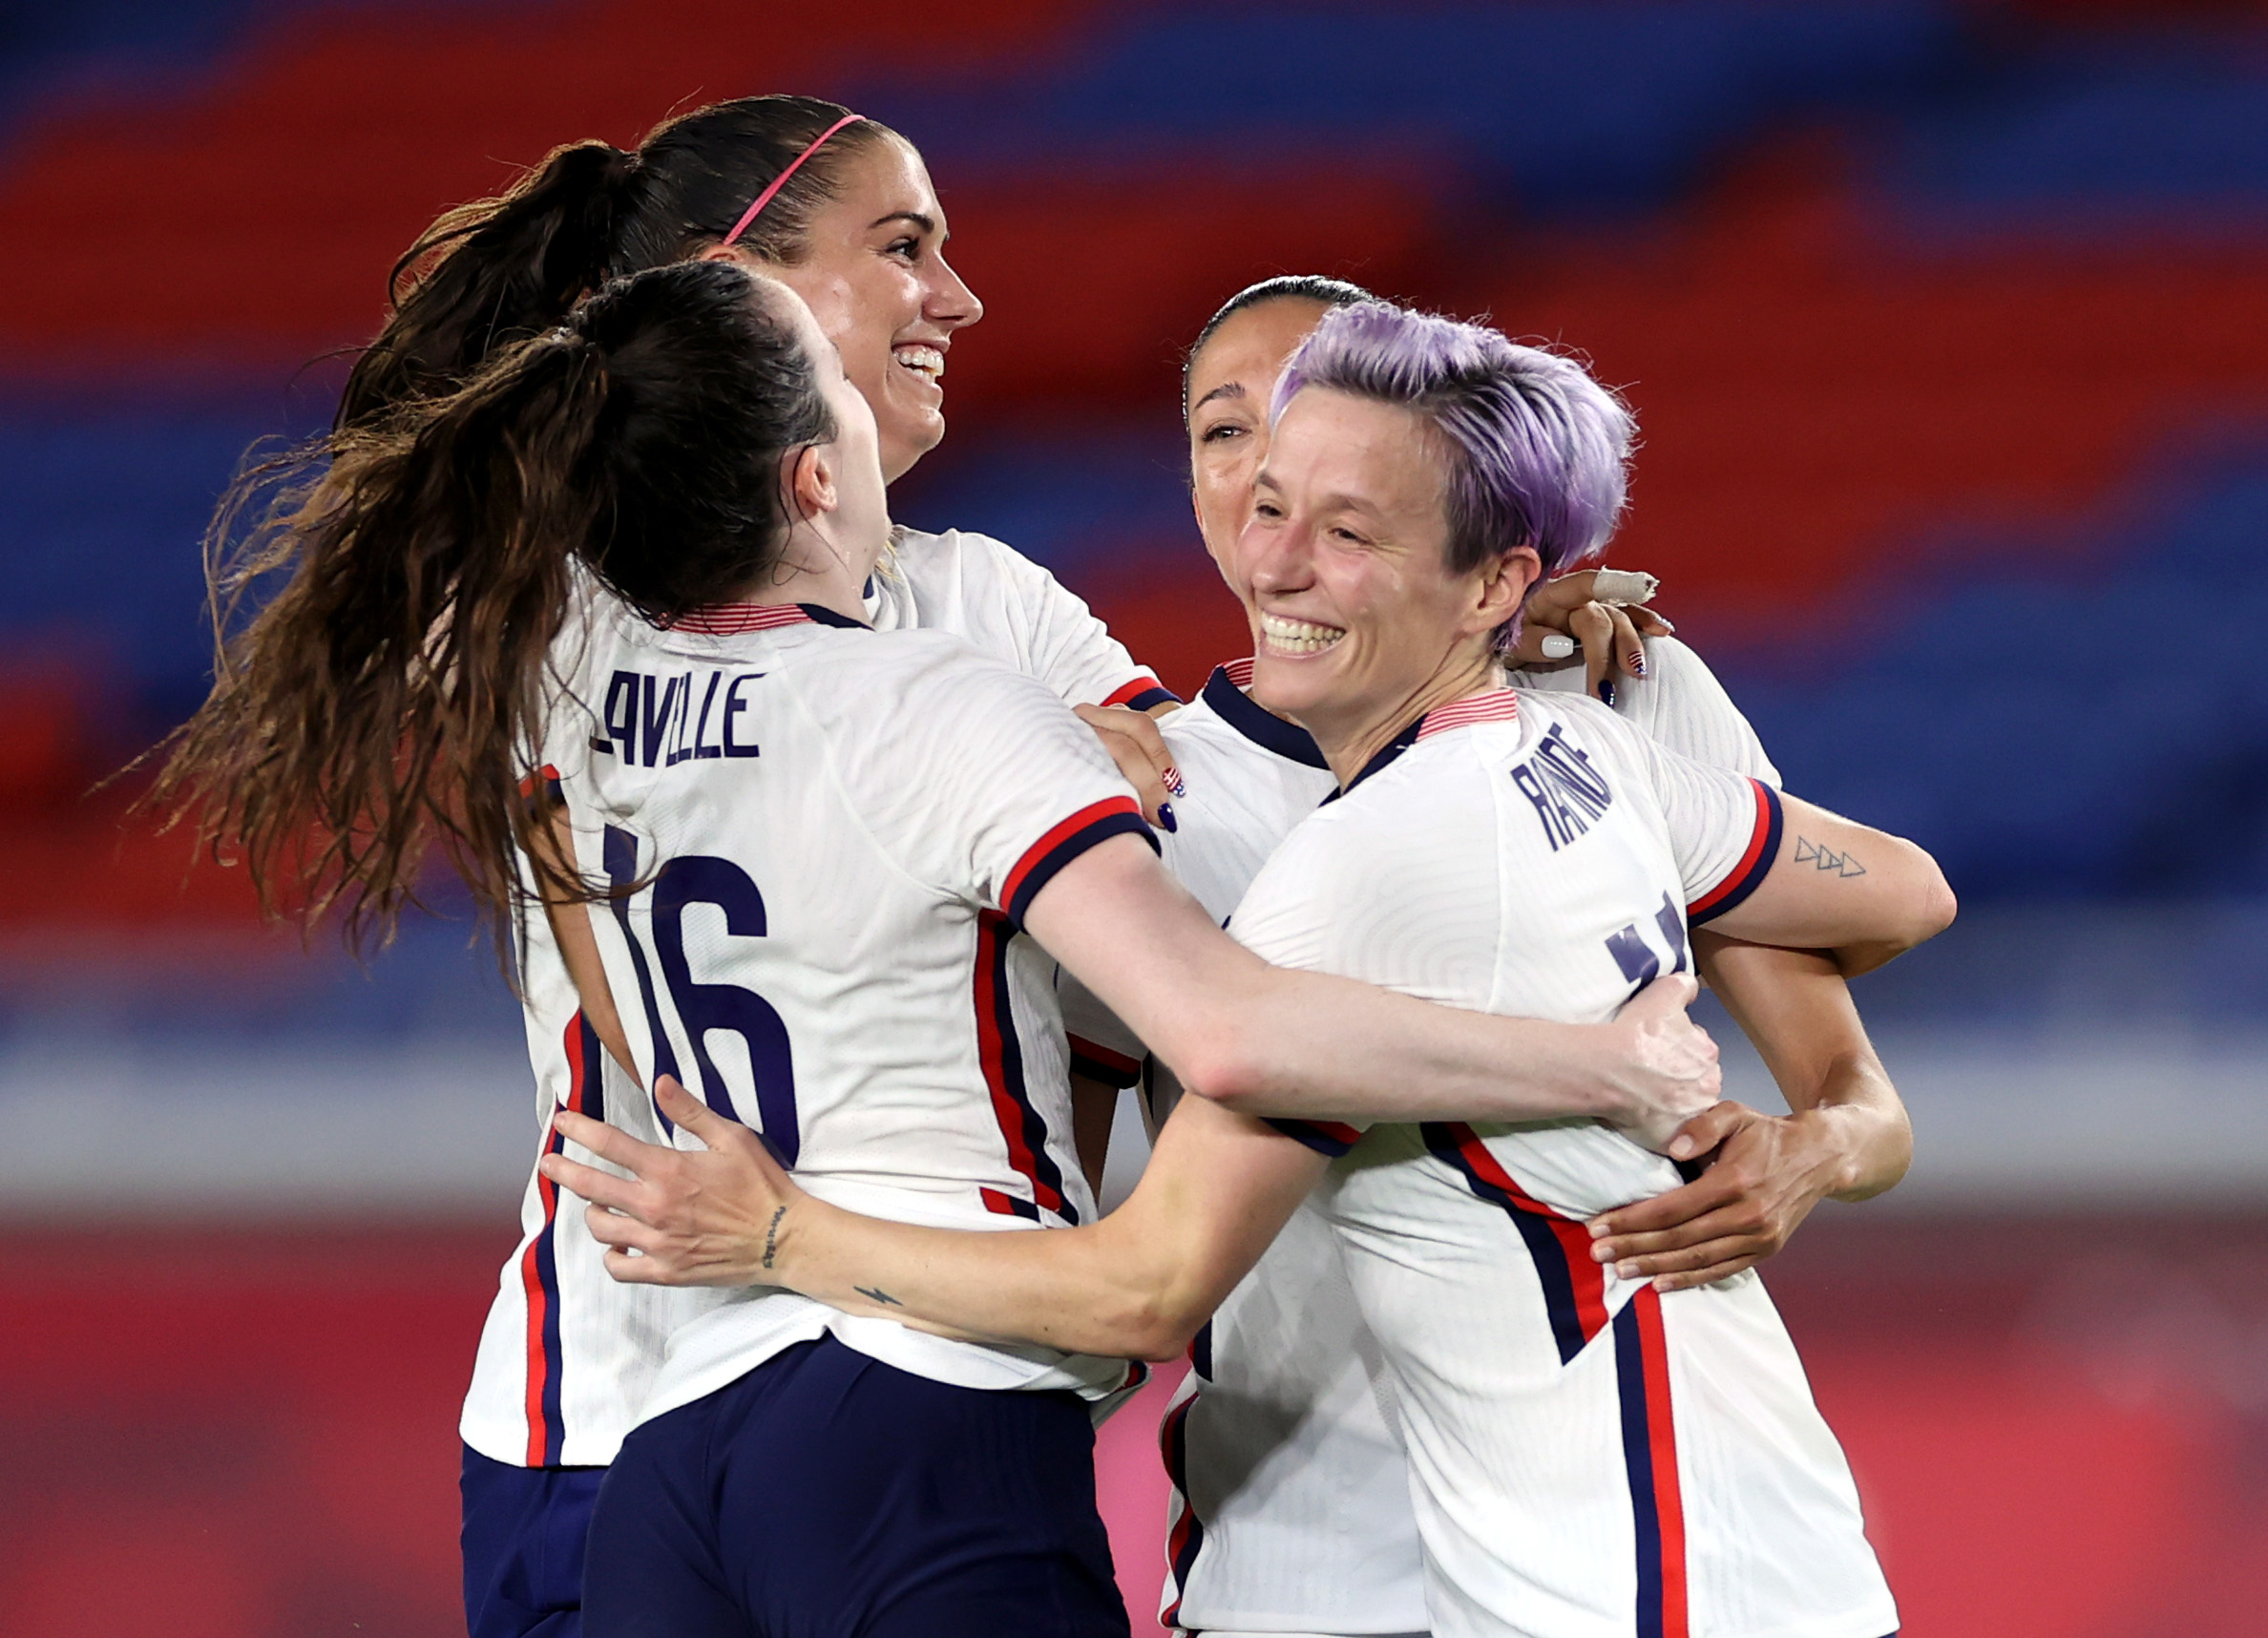 U.S. Soccer Agrees to New CBA with Top Men's, Women's Players Guaranteeing Equal Pay